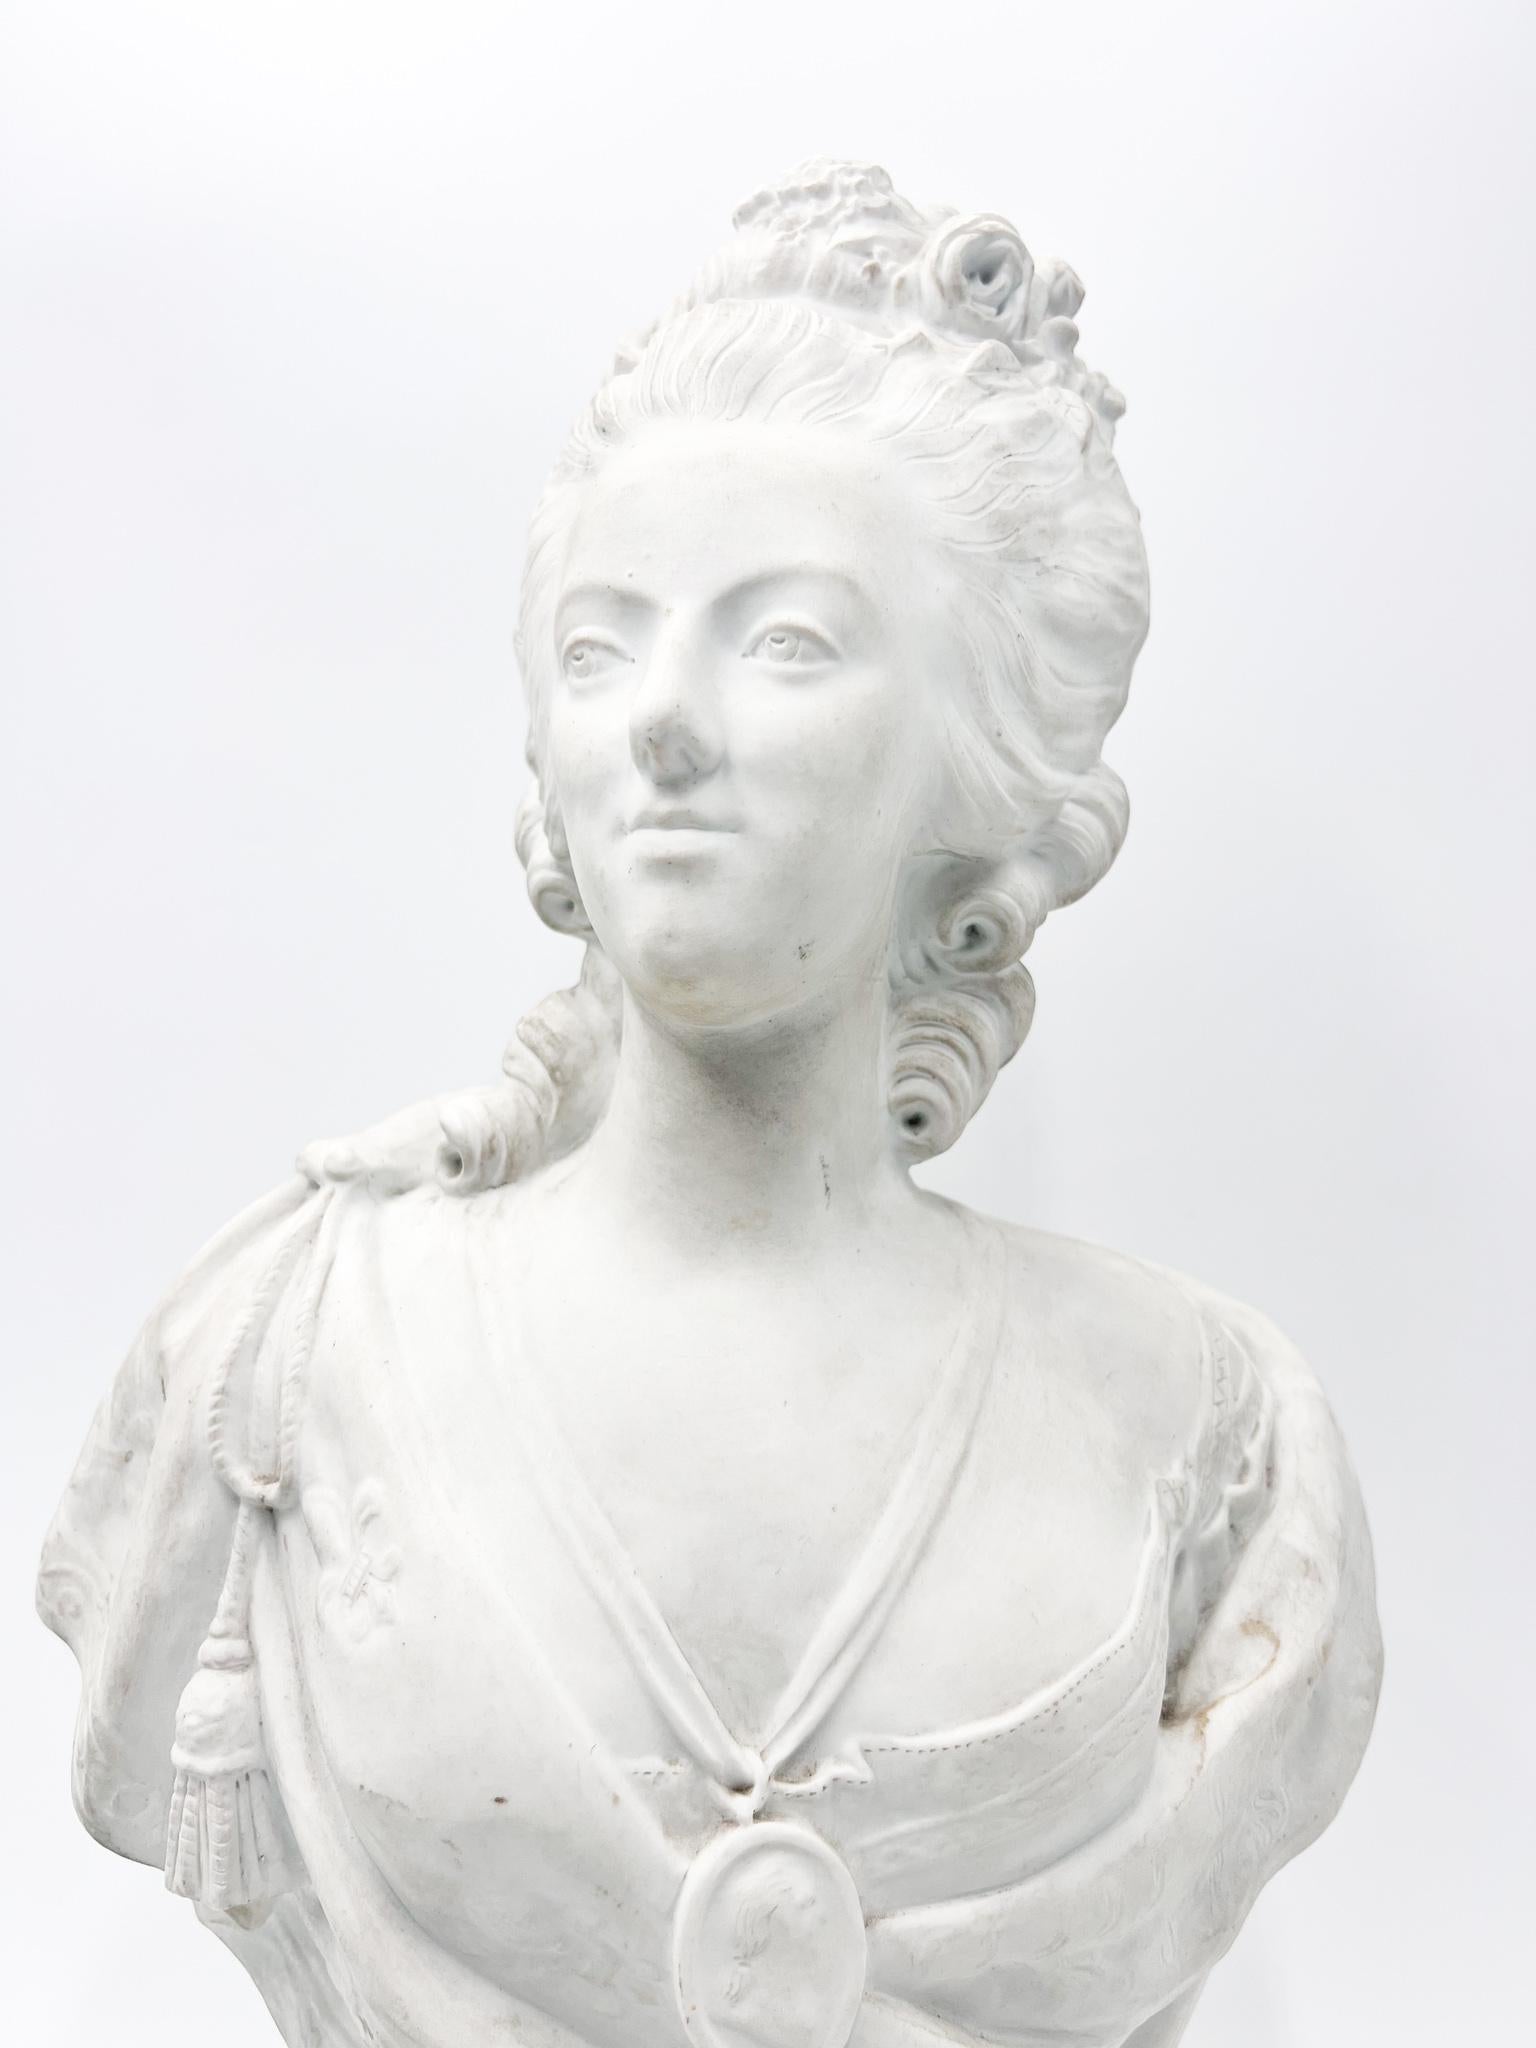 Bust depicting Marie Antoinette, made in Sevres ceramic in the 1940s

Ø cm 25 Ø cm 13 h cm 49

Sèvres pottery is one of the most famous ceramic manufacturers in all of Europe, born in France in the 18th century. From the beginning, the